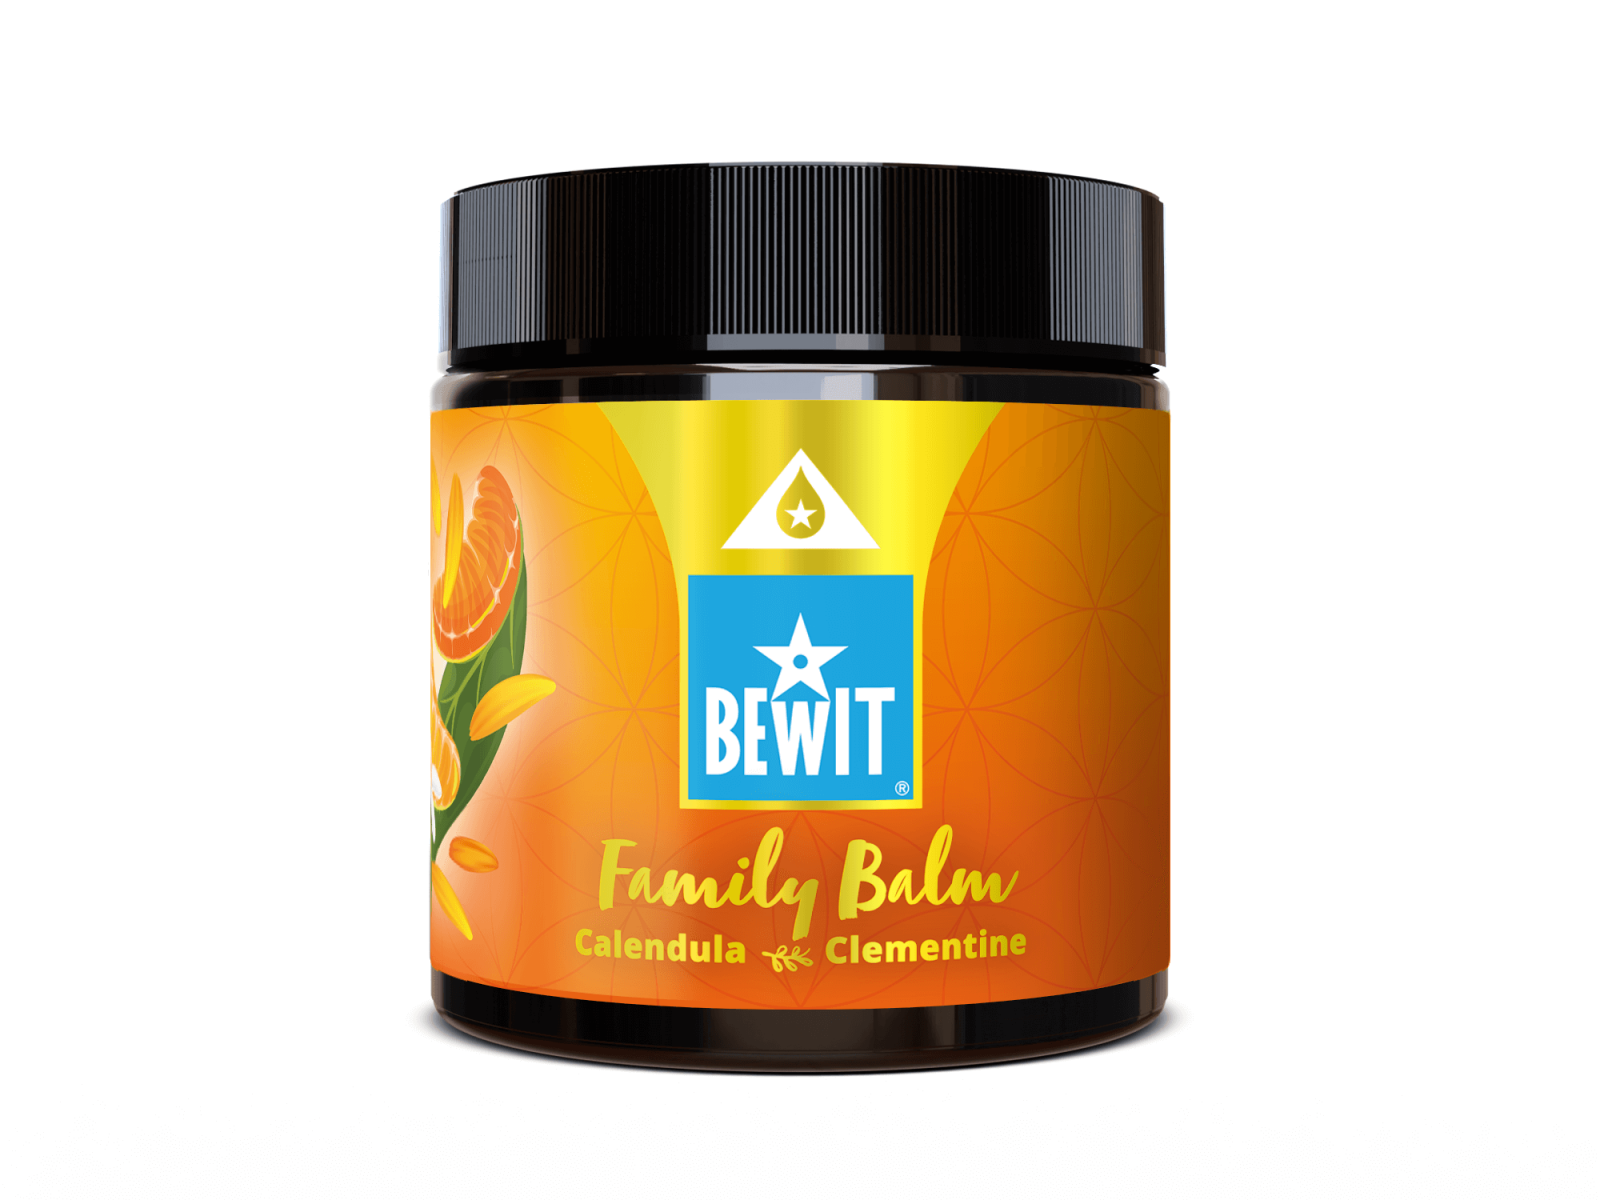 FAMILY BALM CALENDULA AND CLEMENTINE - CARING BALM FOR THE WHOLE FAMILY - 2